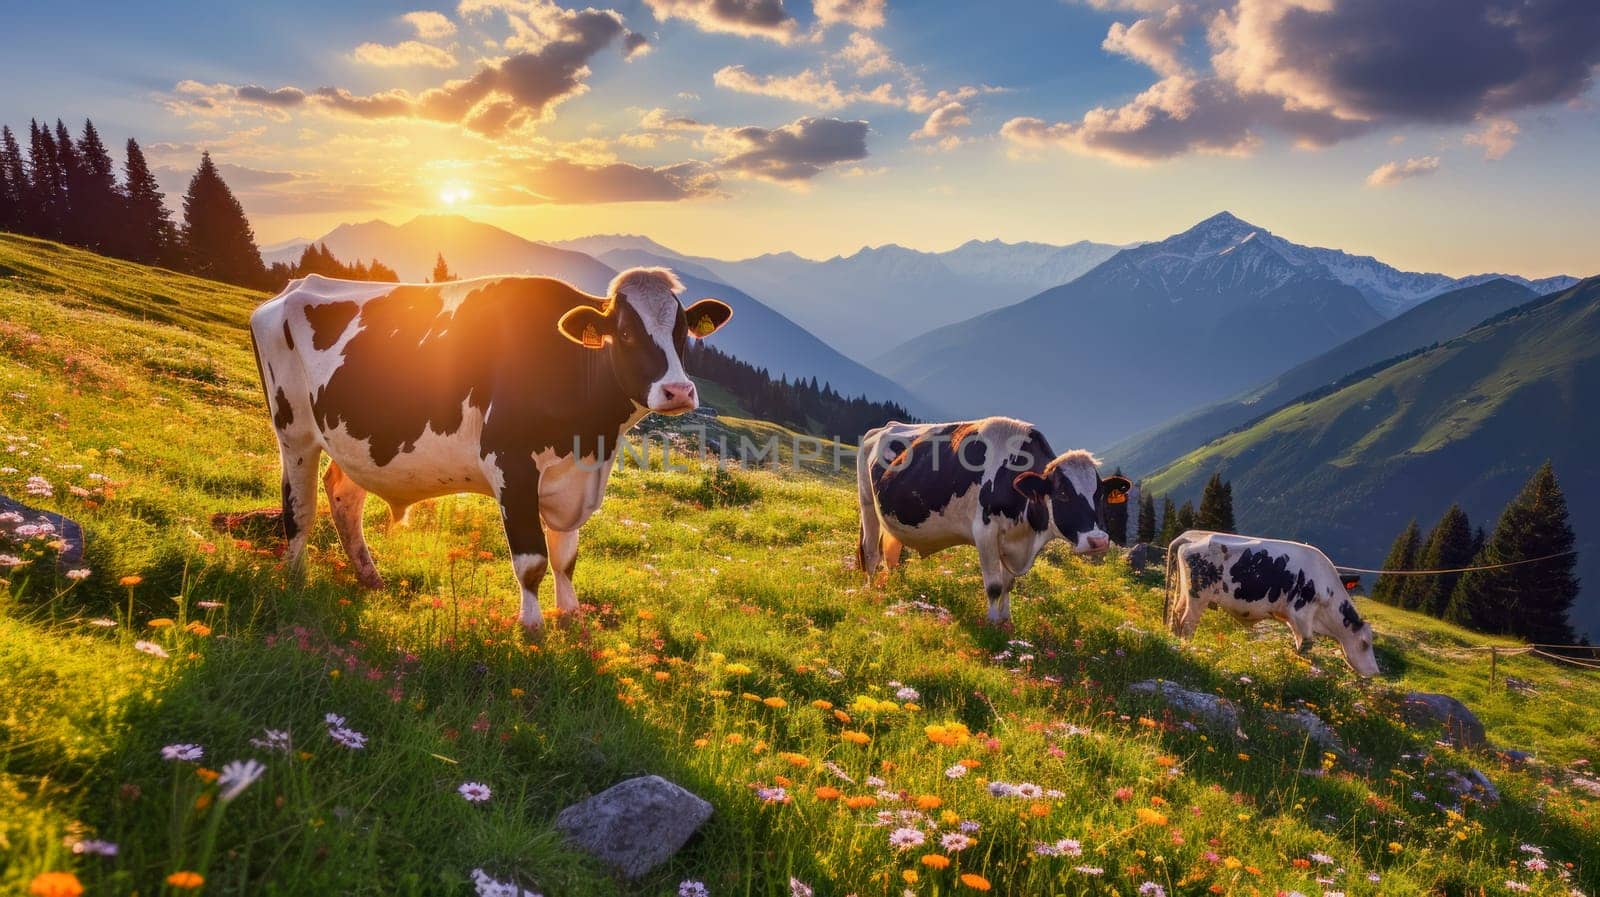 Cows graze in alpine meadows with wildflowers near the mountains. Beautiful landscape, picture, phone screensaver, copy space, advertising, travel agency, tourism, solitude with nature, without people.